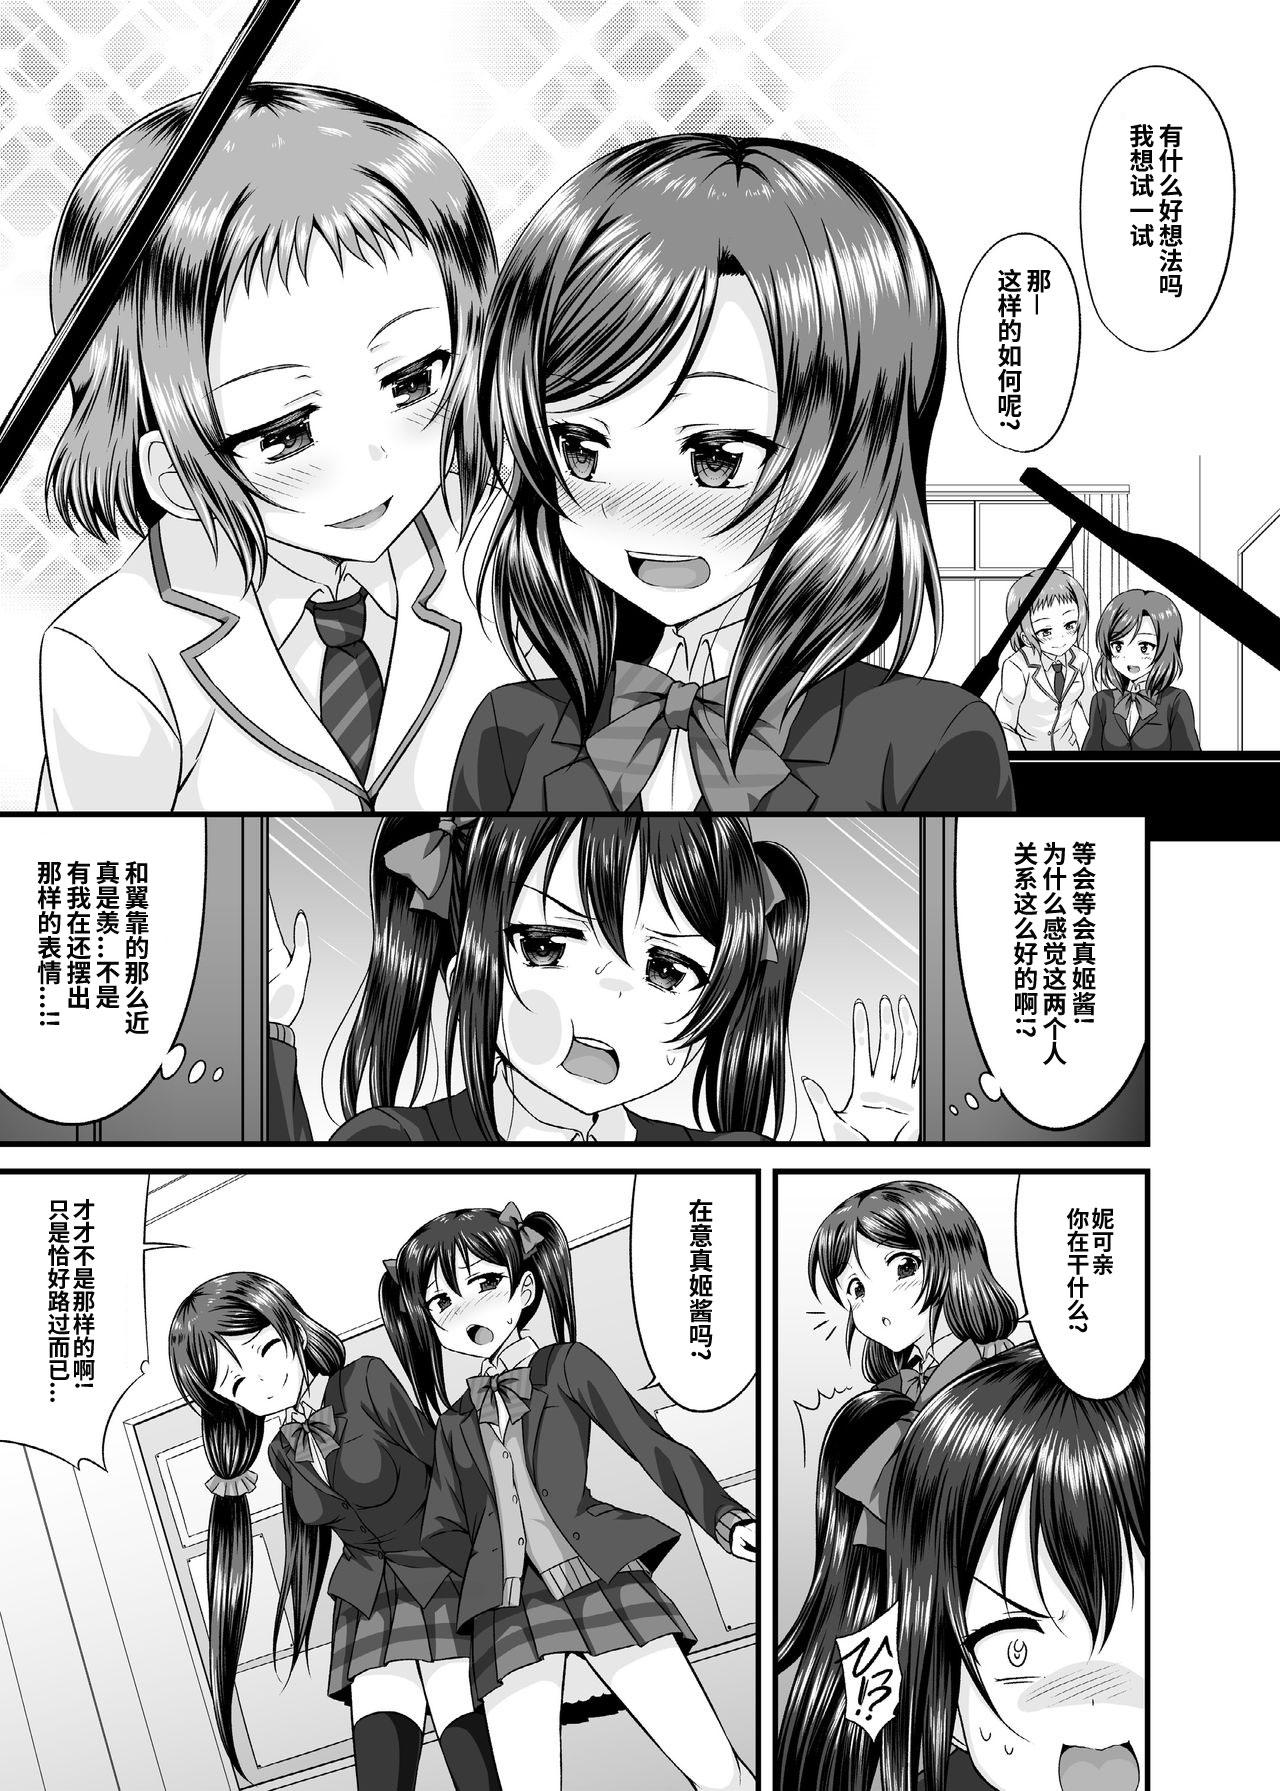 Tan Magnetic Love - Love live Shaven - Page 3